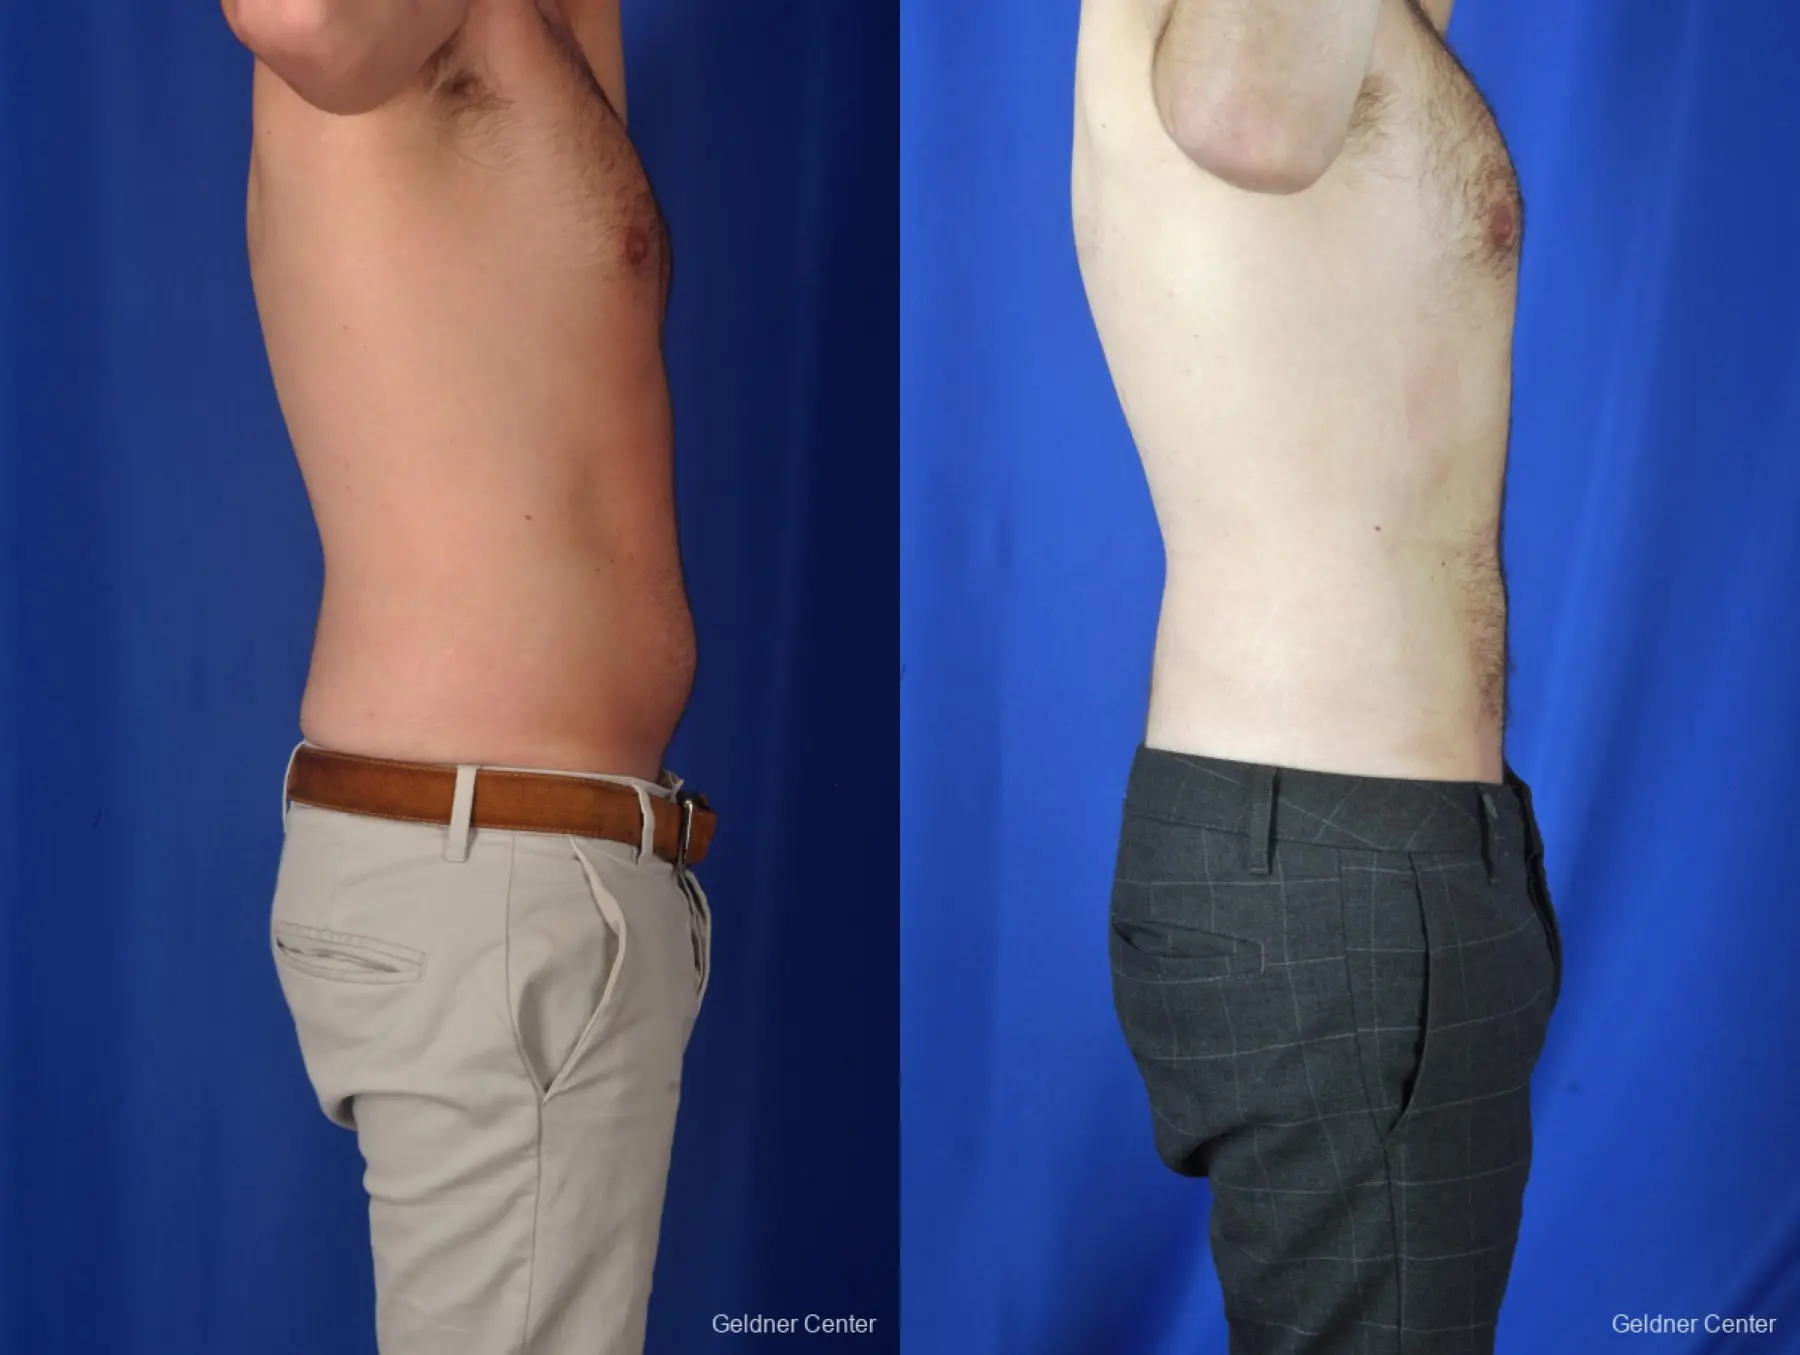 Liposuction For Men: Patient 3 - Before and After 3